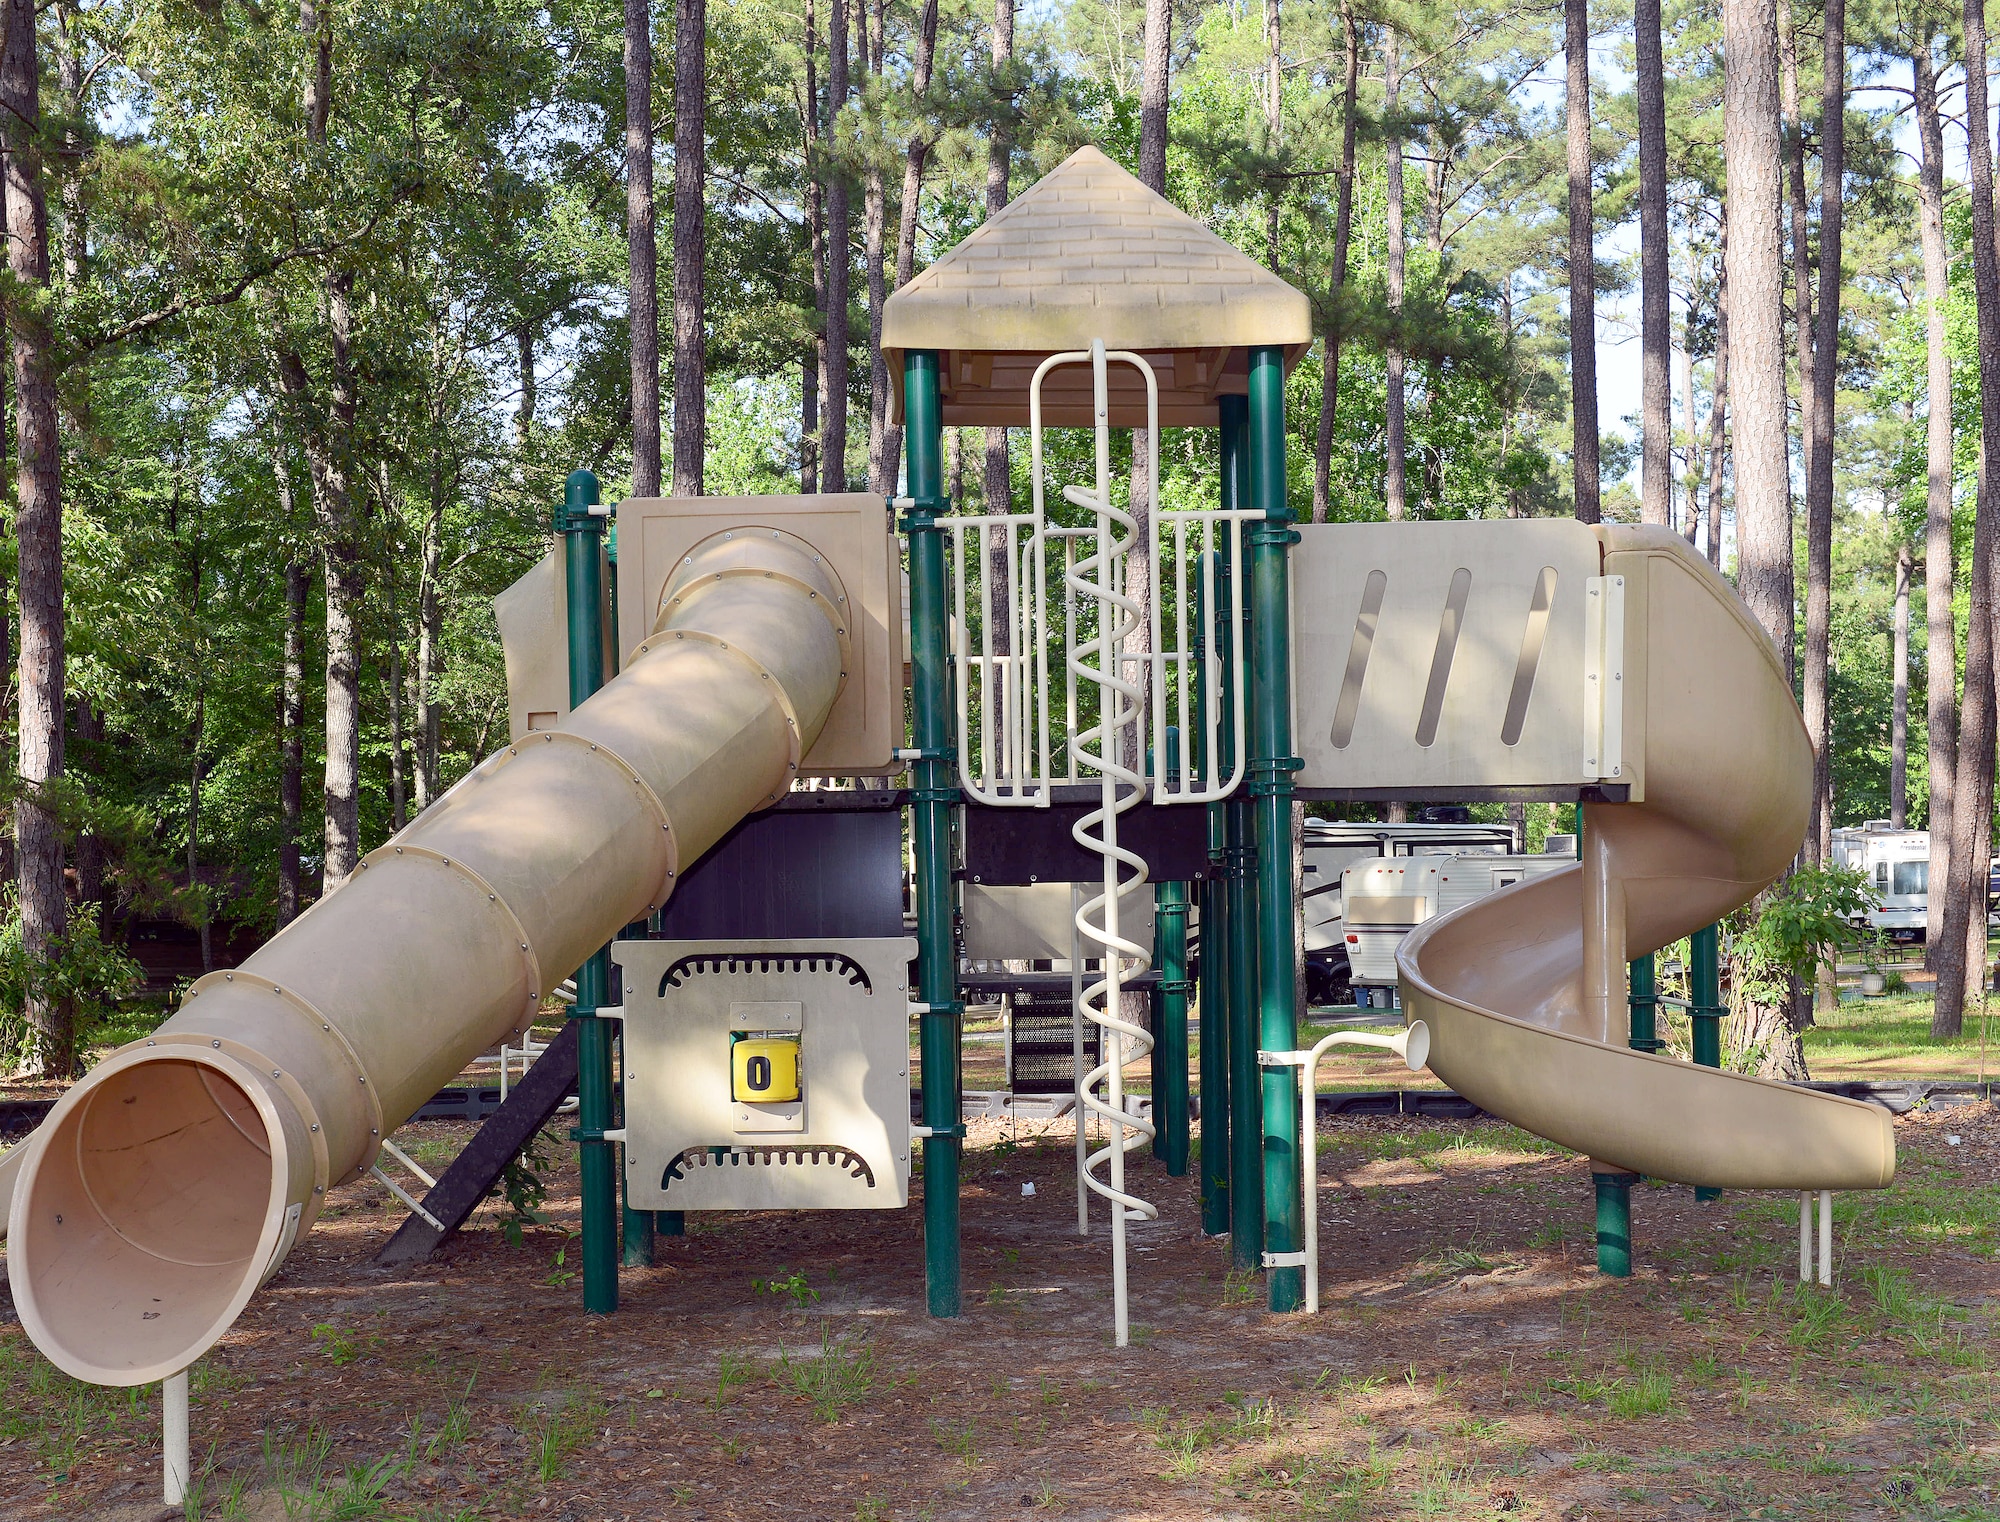 Robins Family Campground, commonly referred to as Fam Camp, features play areas for children of all ages. (U.S. Air Force photo by Tommie Horton)